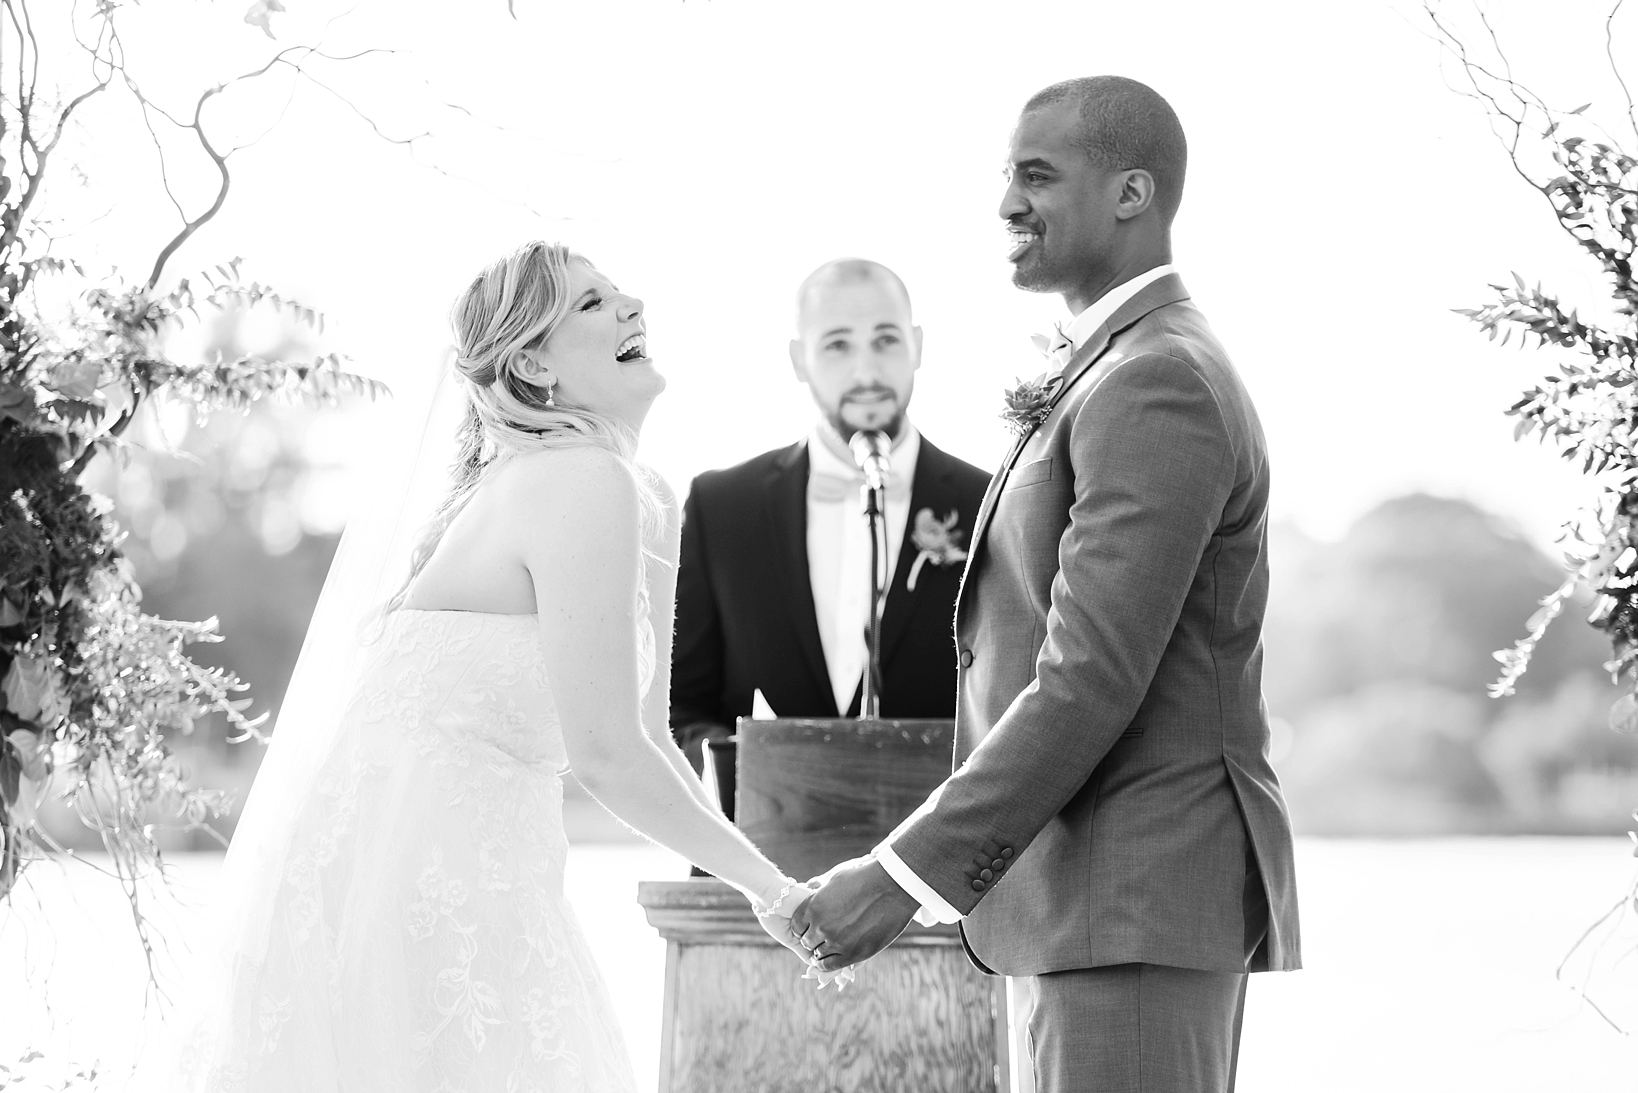 Black and White image of a bride laughing during the ceremony